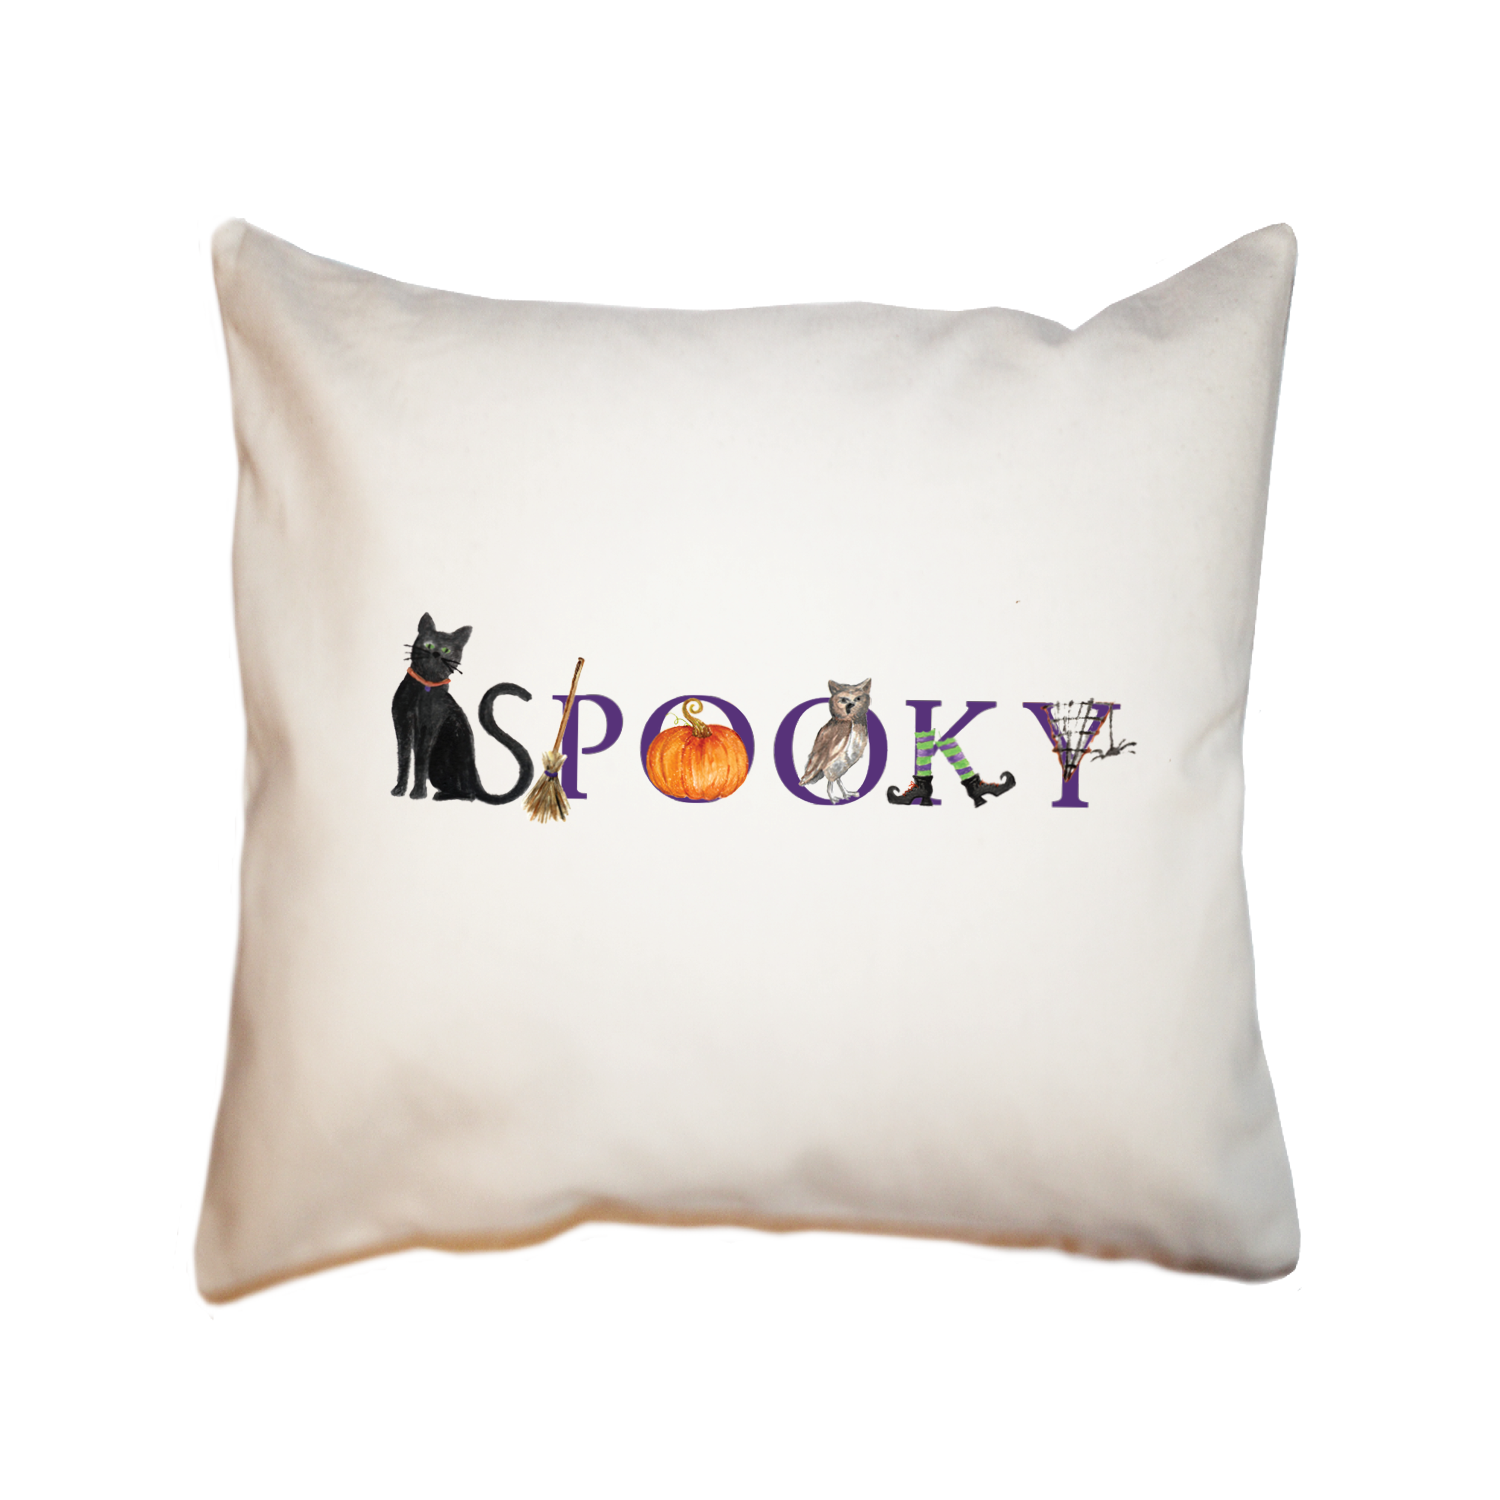 spooky square pillow